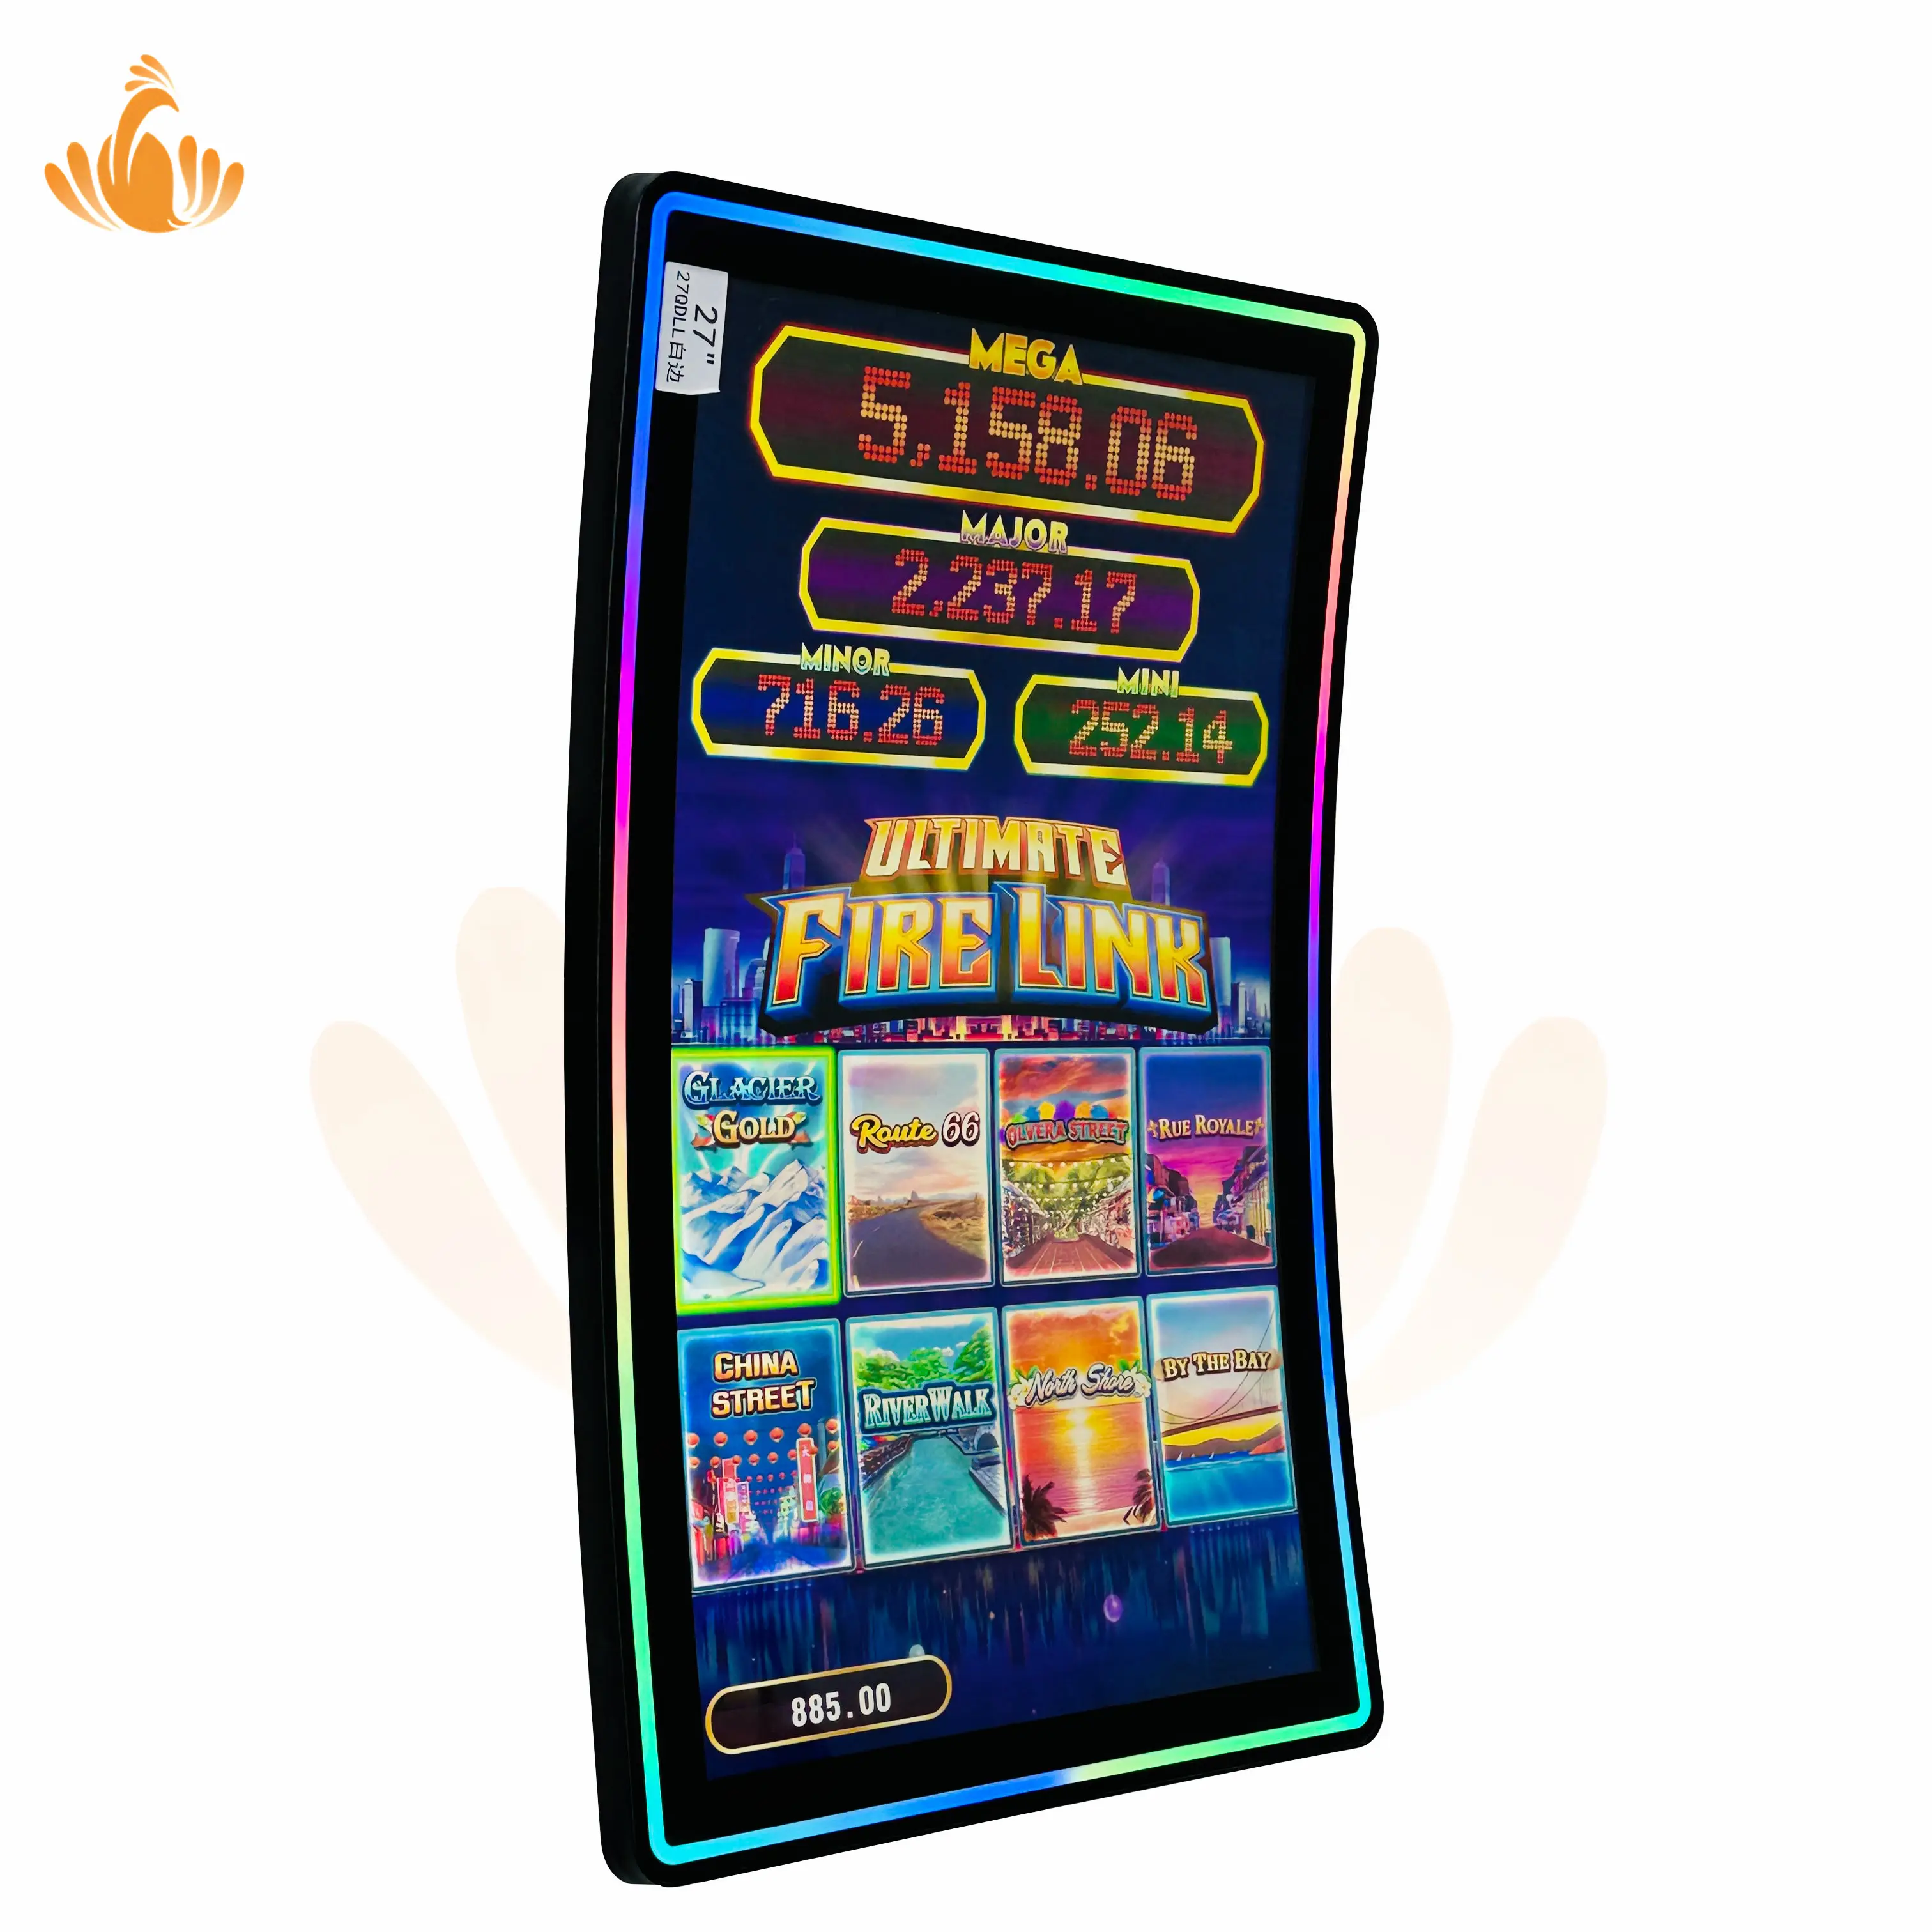 27 inch curve capacitive LED aluminum bezel touch monitor fire link game machine